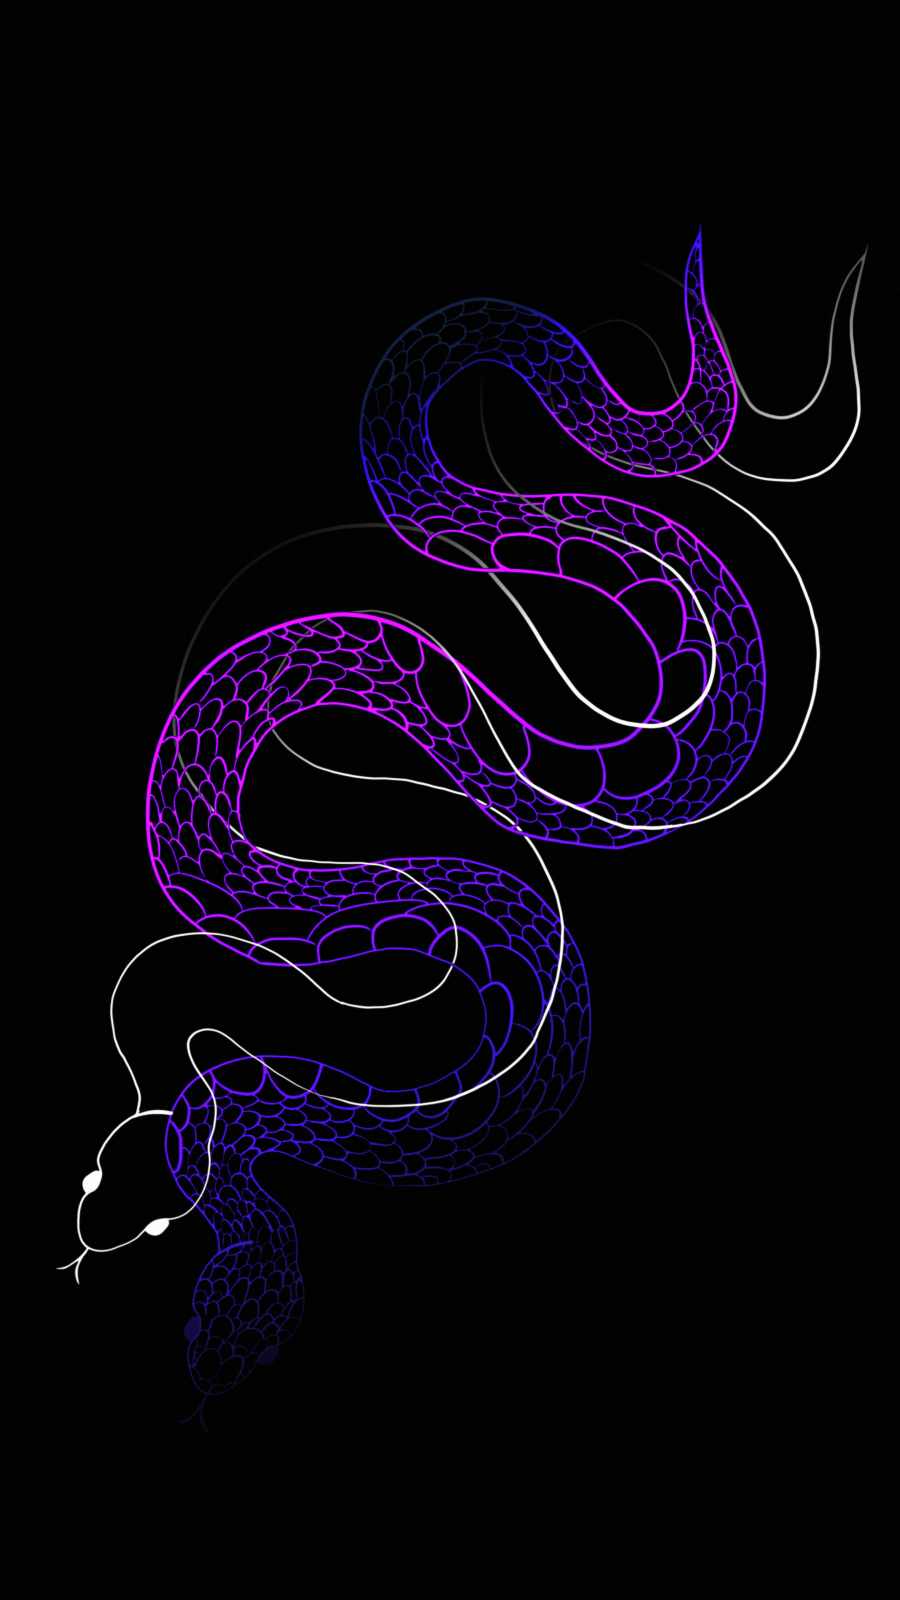 Download wallpaper 800x1200 snake color reptile iphone 4s4 for parallax  hd background